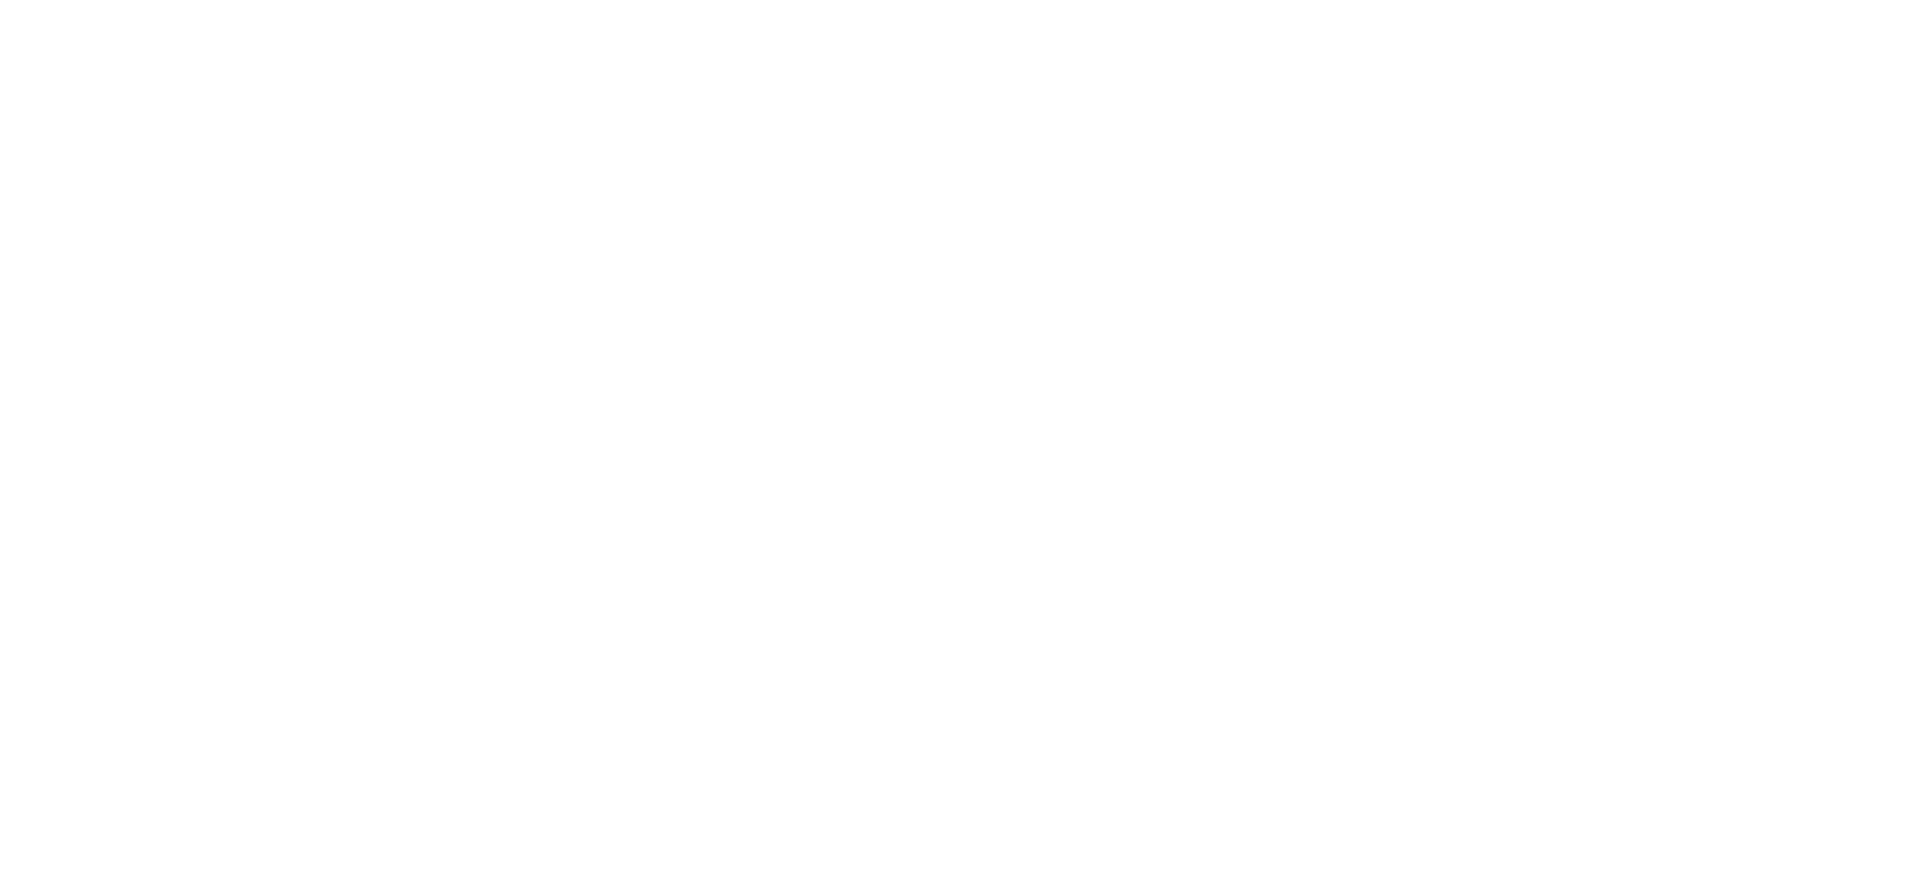 GOLF YOUR WAY!